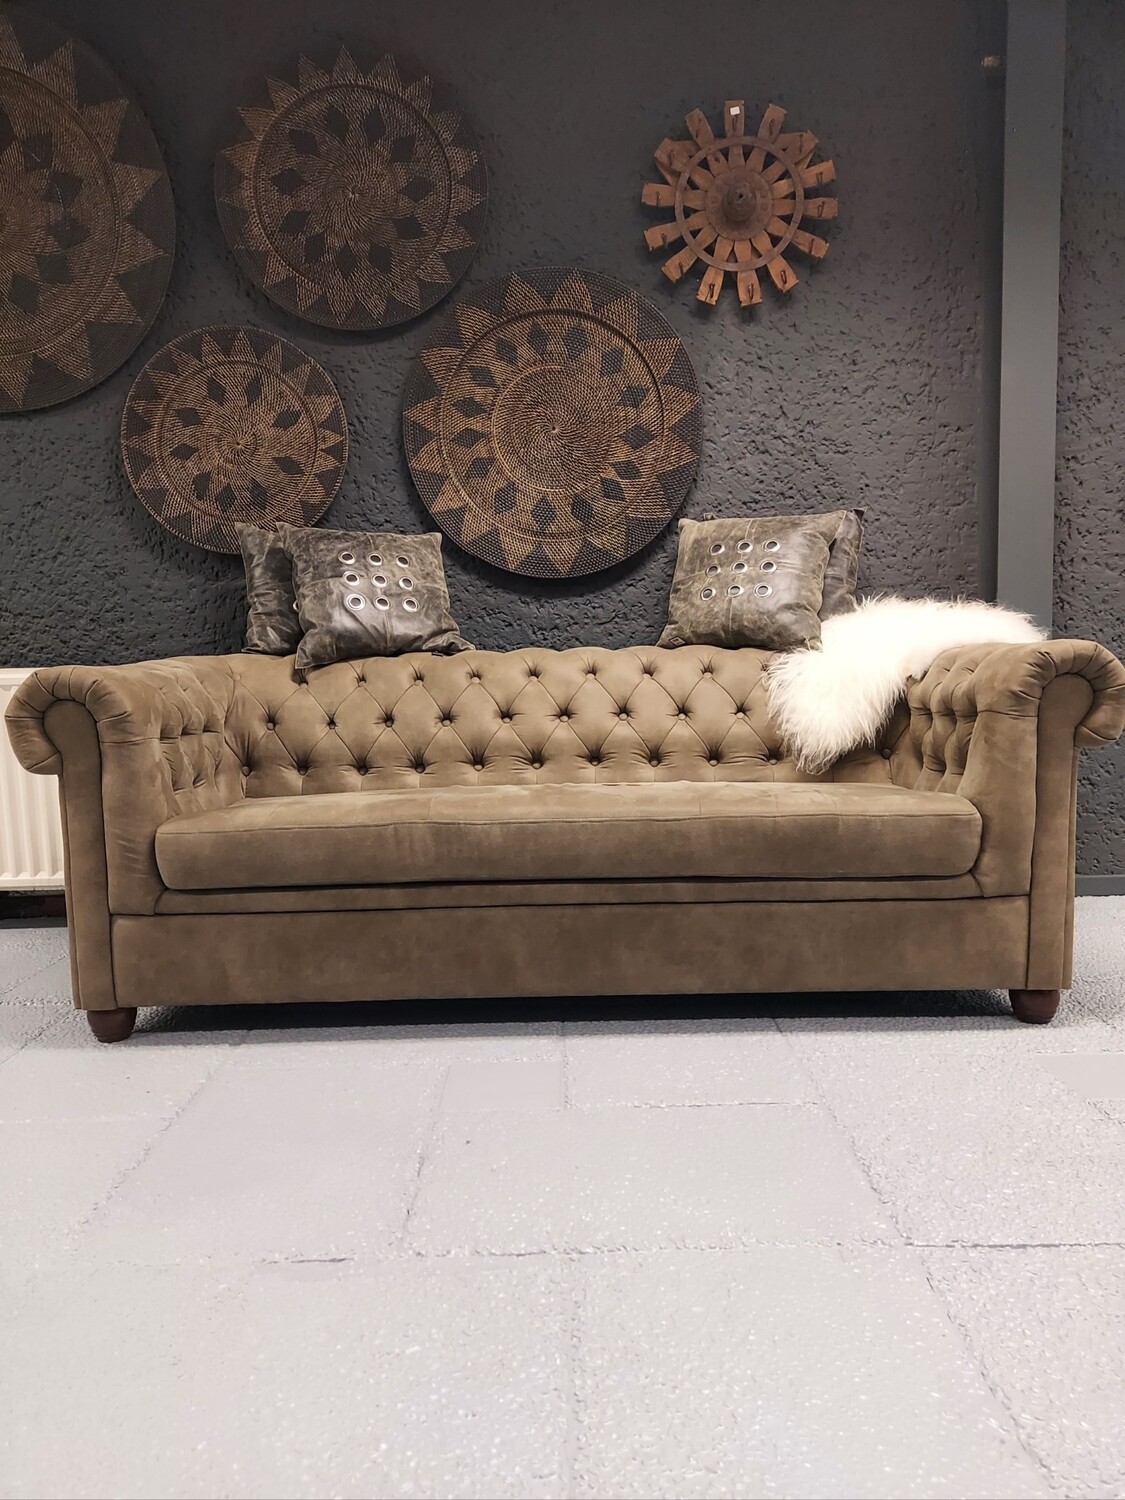 Taupe-colored, Suede-look sofa